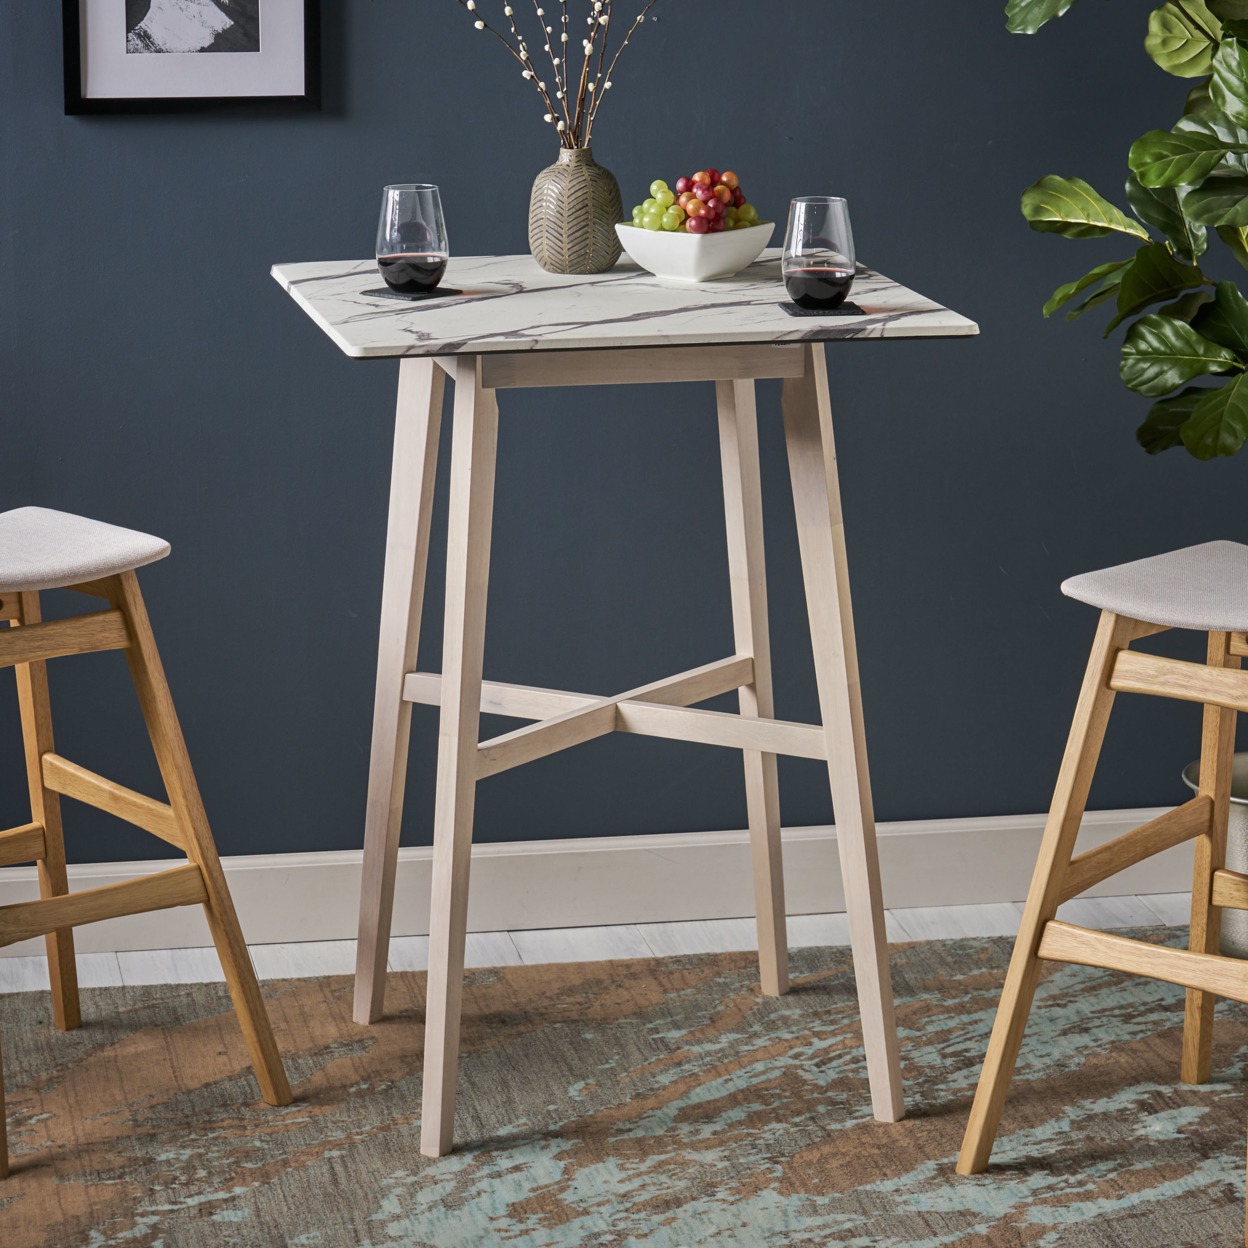 Lily Modern Bar Table With Rubberwood Legs And Laminate Table Top - Gray Finish + Black